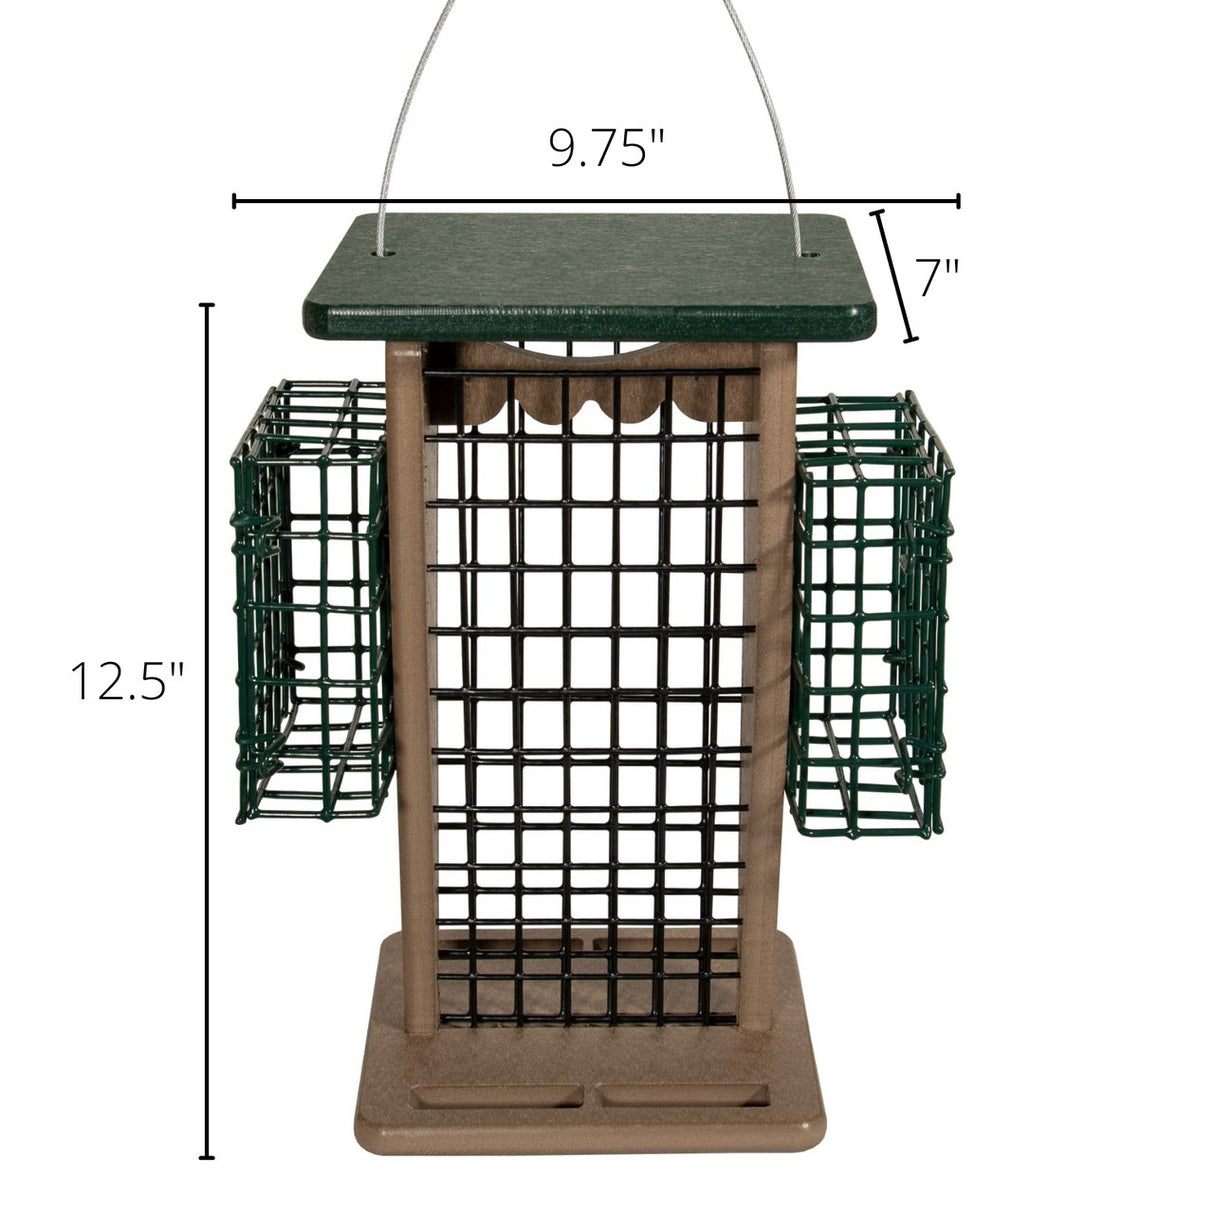 JCS Wildlife Whole Peanut Feeder With 2 Suet Cages - Great for Woodpeckers and Peanut Loving Birds! - JCS Wildlife